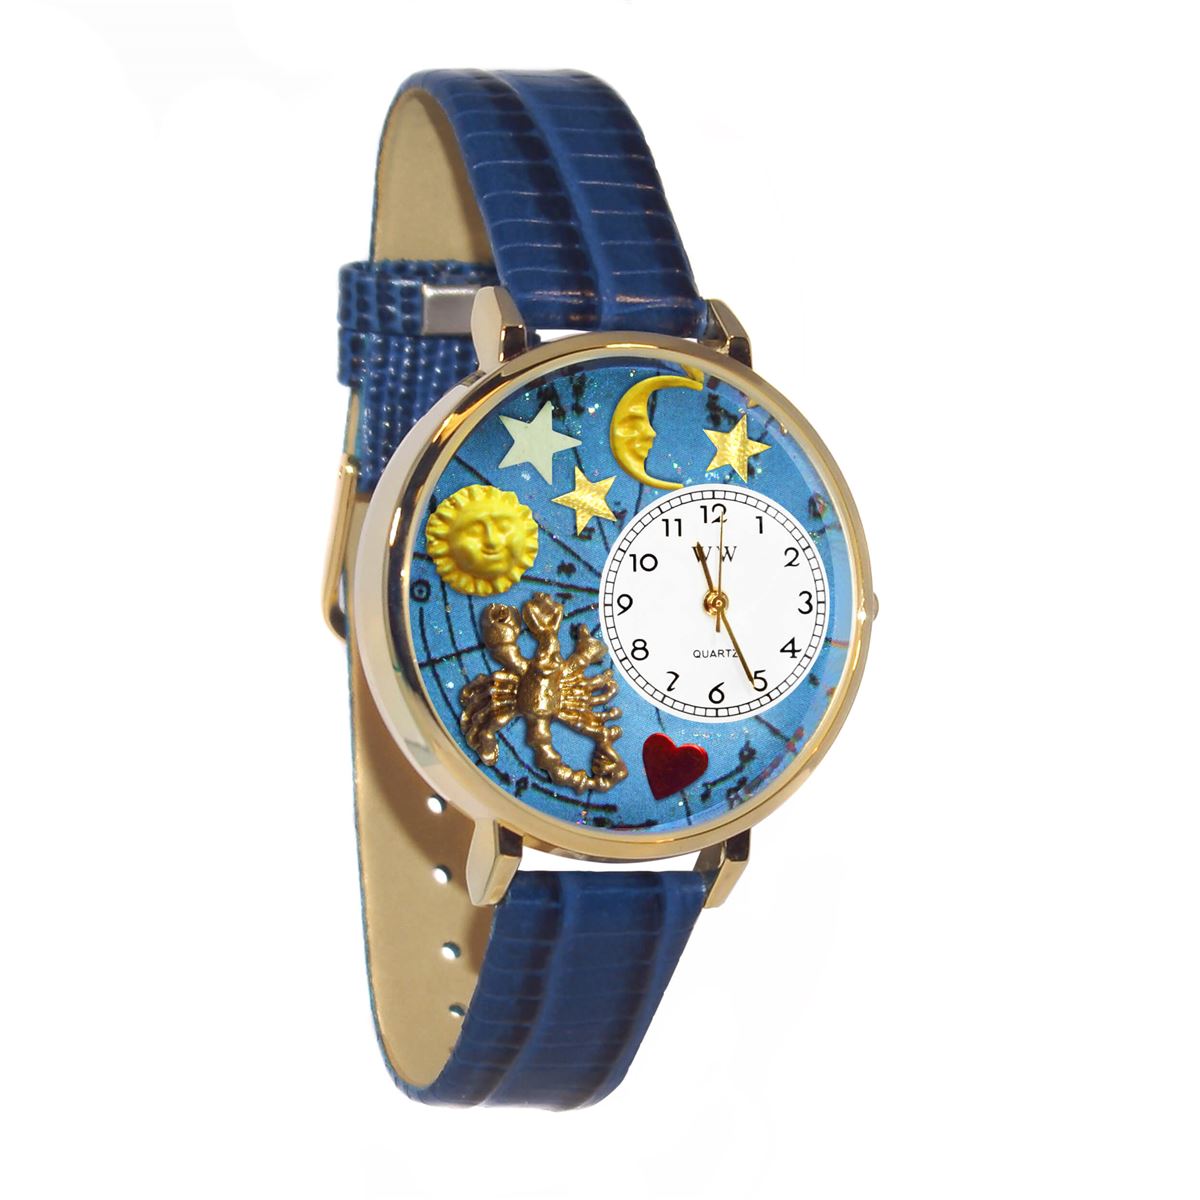 Whimsical Gifts | Scorpio Zodiac 3D Watch Large Style | Handmade in USA | Zodiac & Celestial |  | Novelty Unique Fun Miniatures Gift | Gold Finish Royal Blue Leather Watch Band